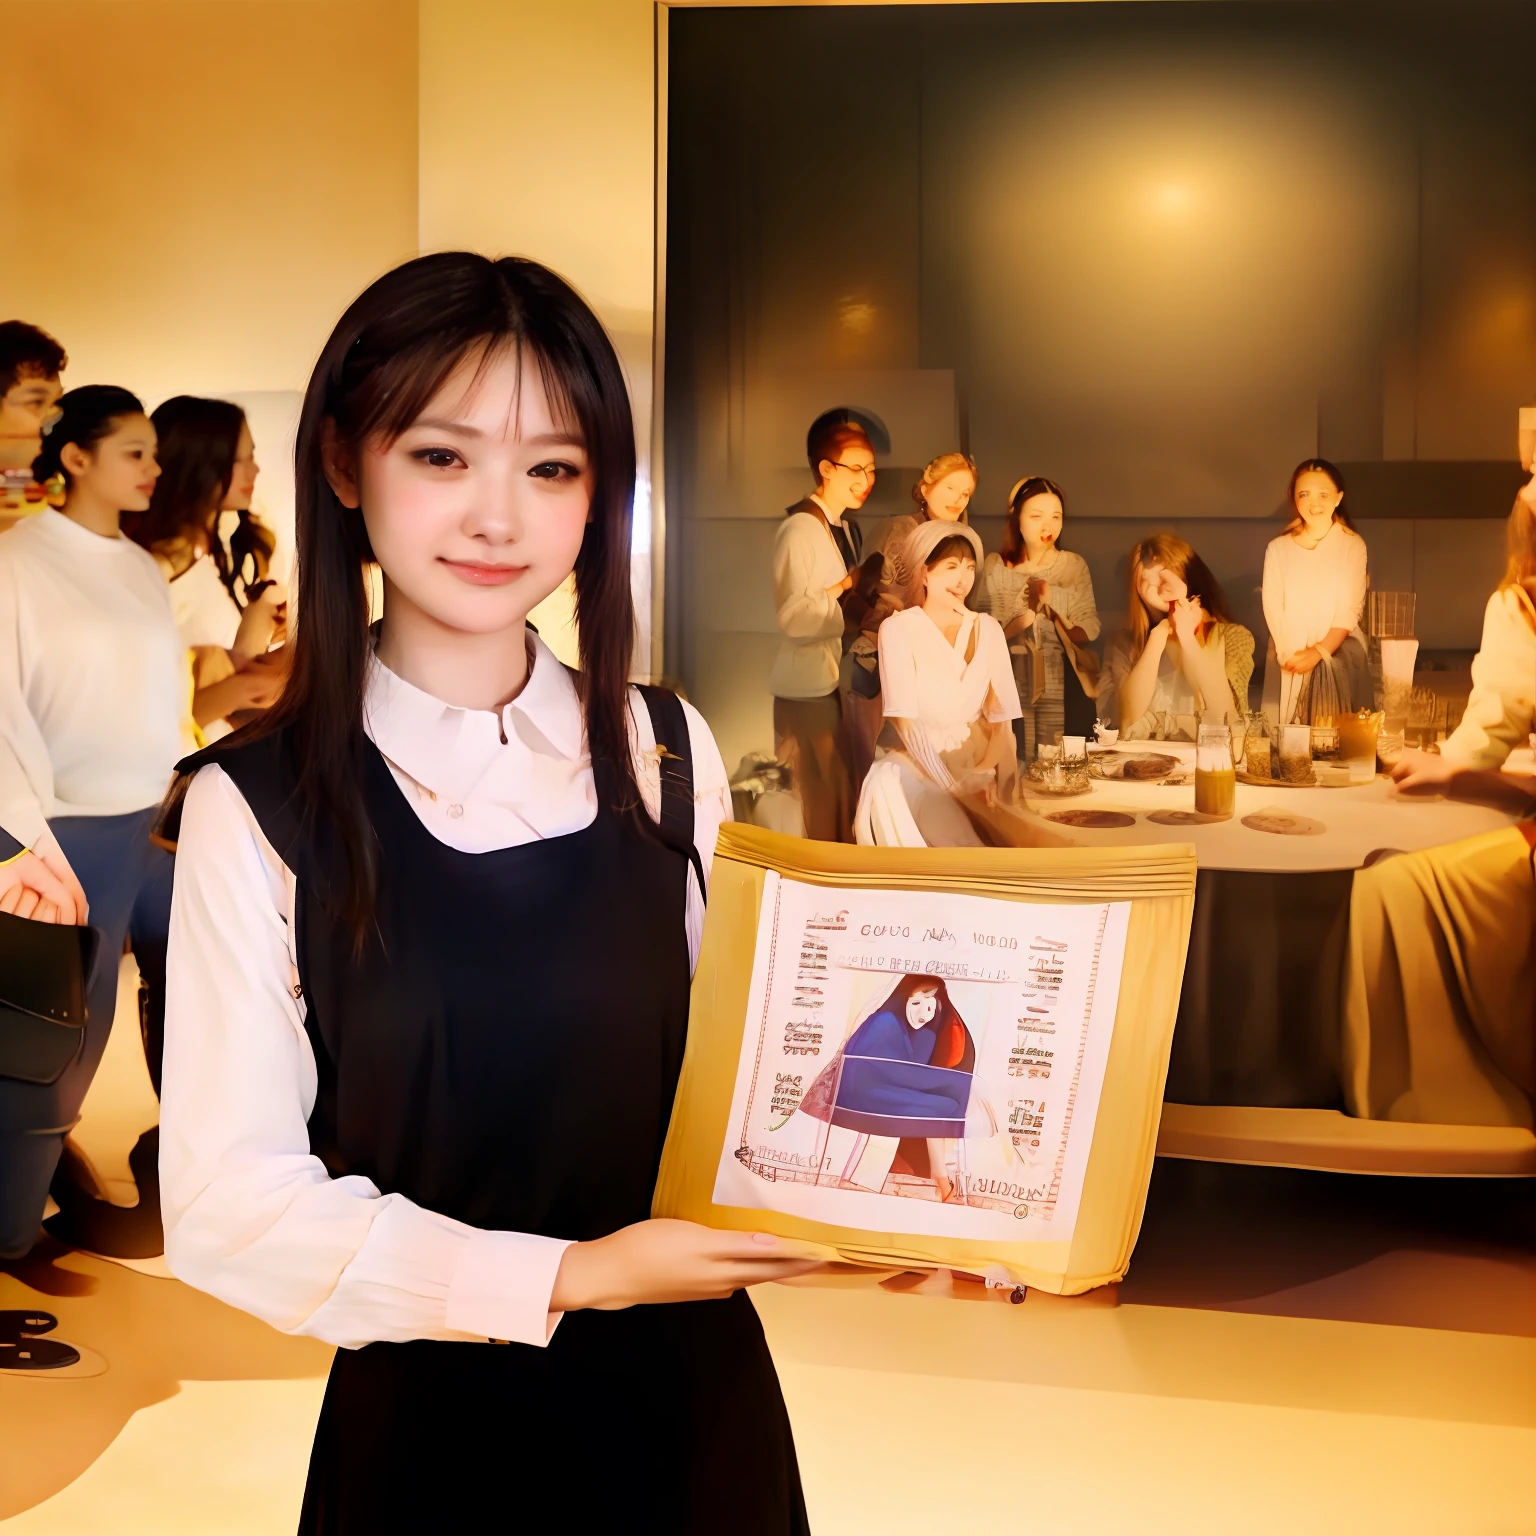 A High resolution Photo, In Tokyo, a socially awkward and loney a high-teen,  individual Japanese Girl, while smiling, presents a Painting individual Japanese Girl, while smiling, presents a Painting of the Last supper with digitalize Math graph interface add-on in The Picture, Behind the girl, there is the art gallery where a celebrity with Camera and Tv-cluies, and a group of similarly happy individuals photographing the celebrity.